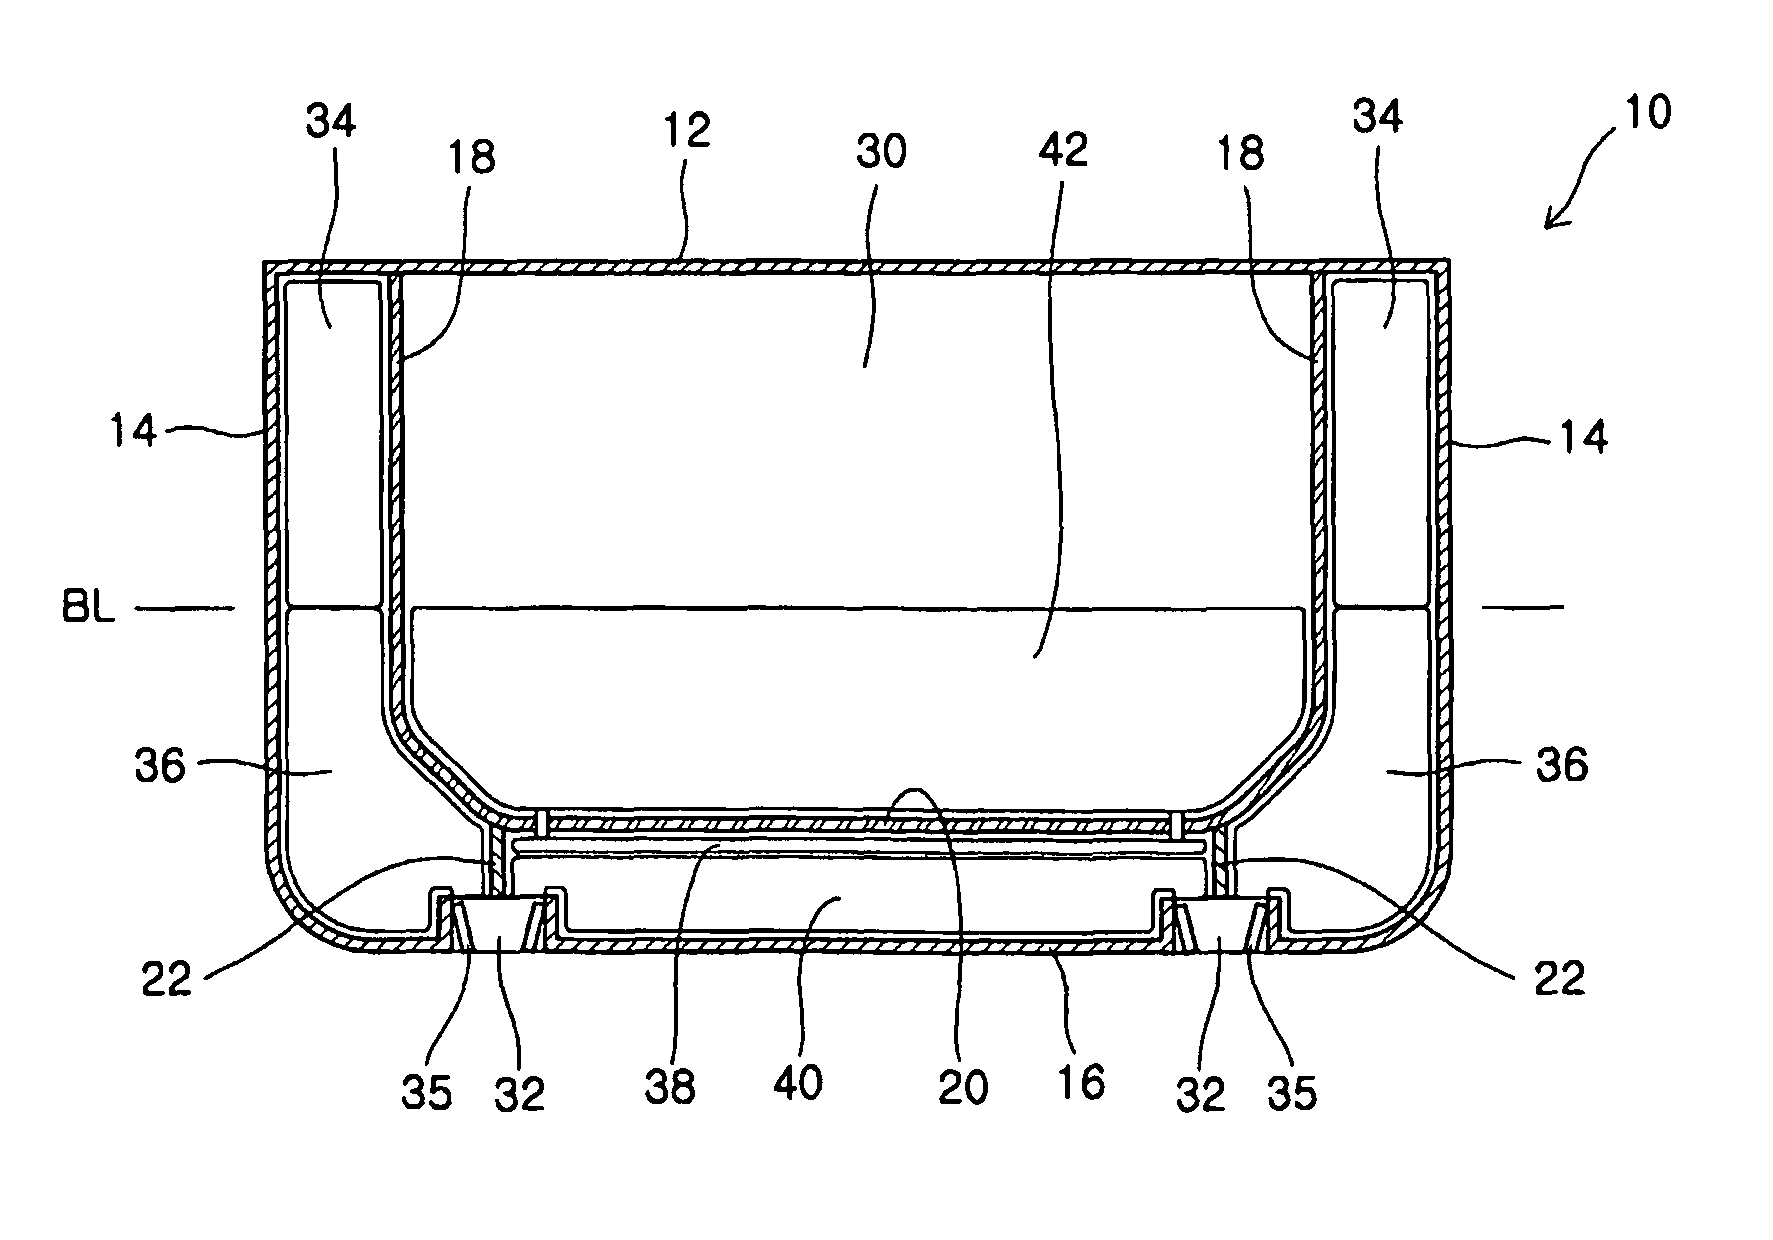 Vessel including automatic ballast system using tubes